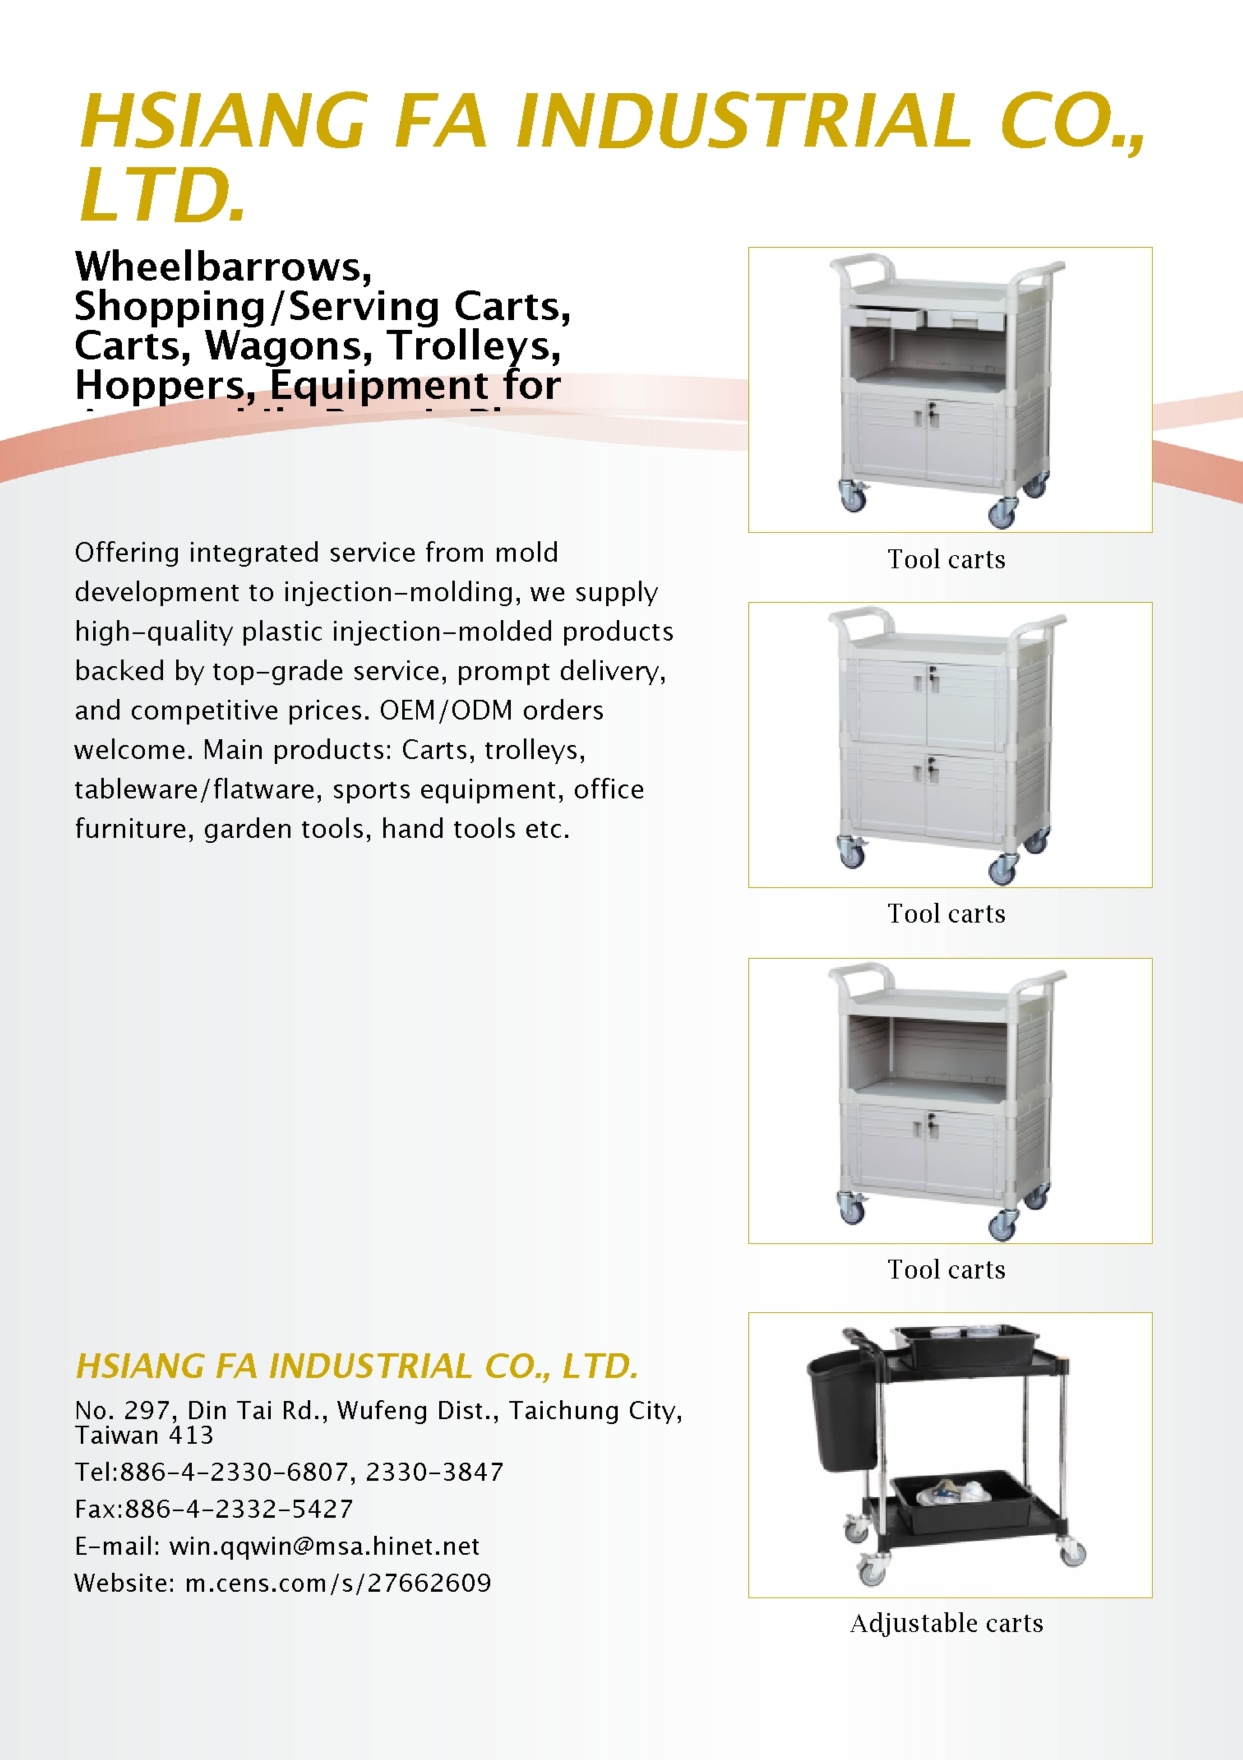 HSIANG FA INDUSTRIAL CO., LTD.